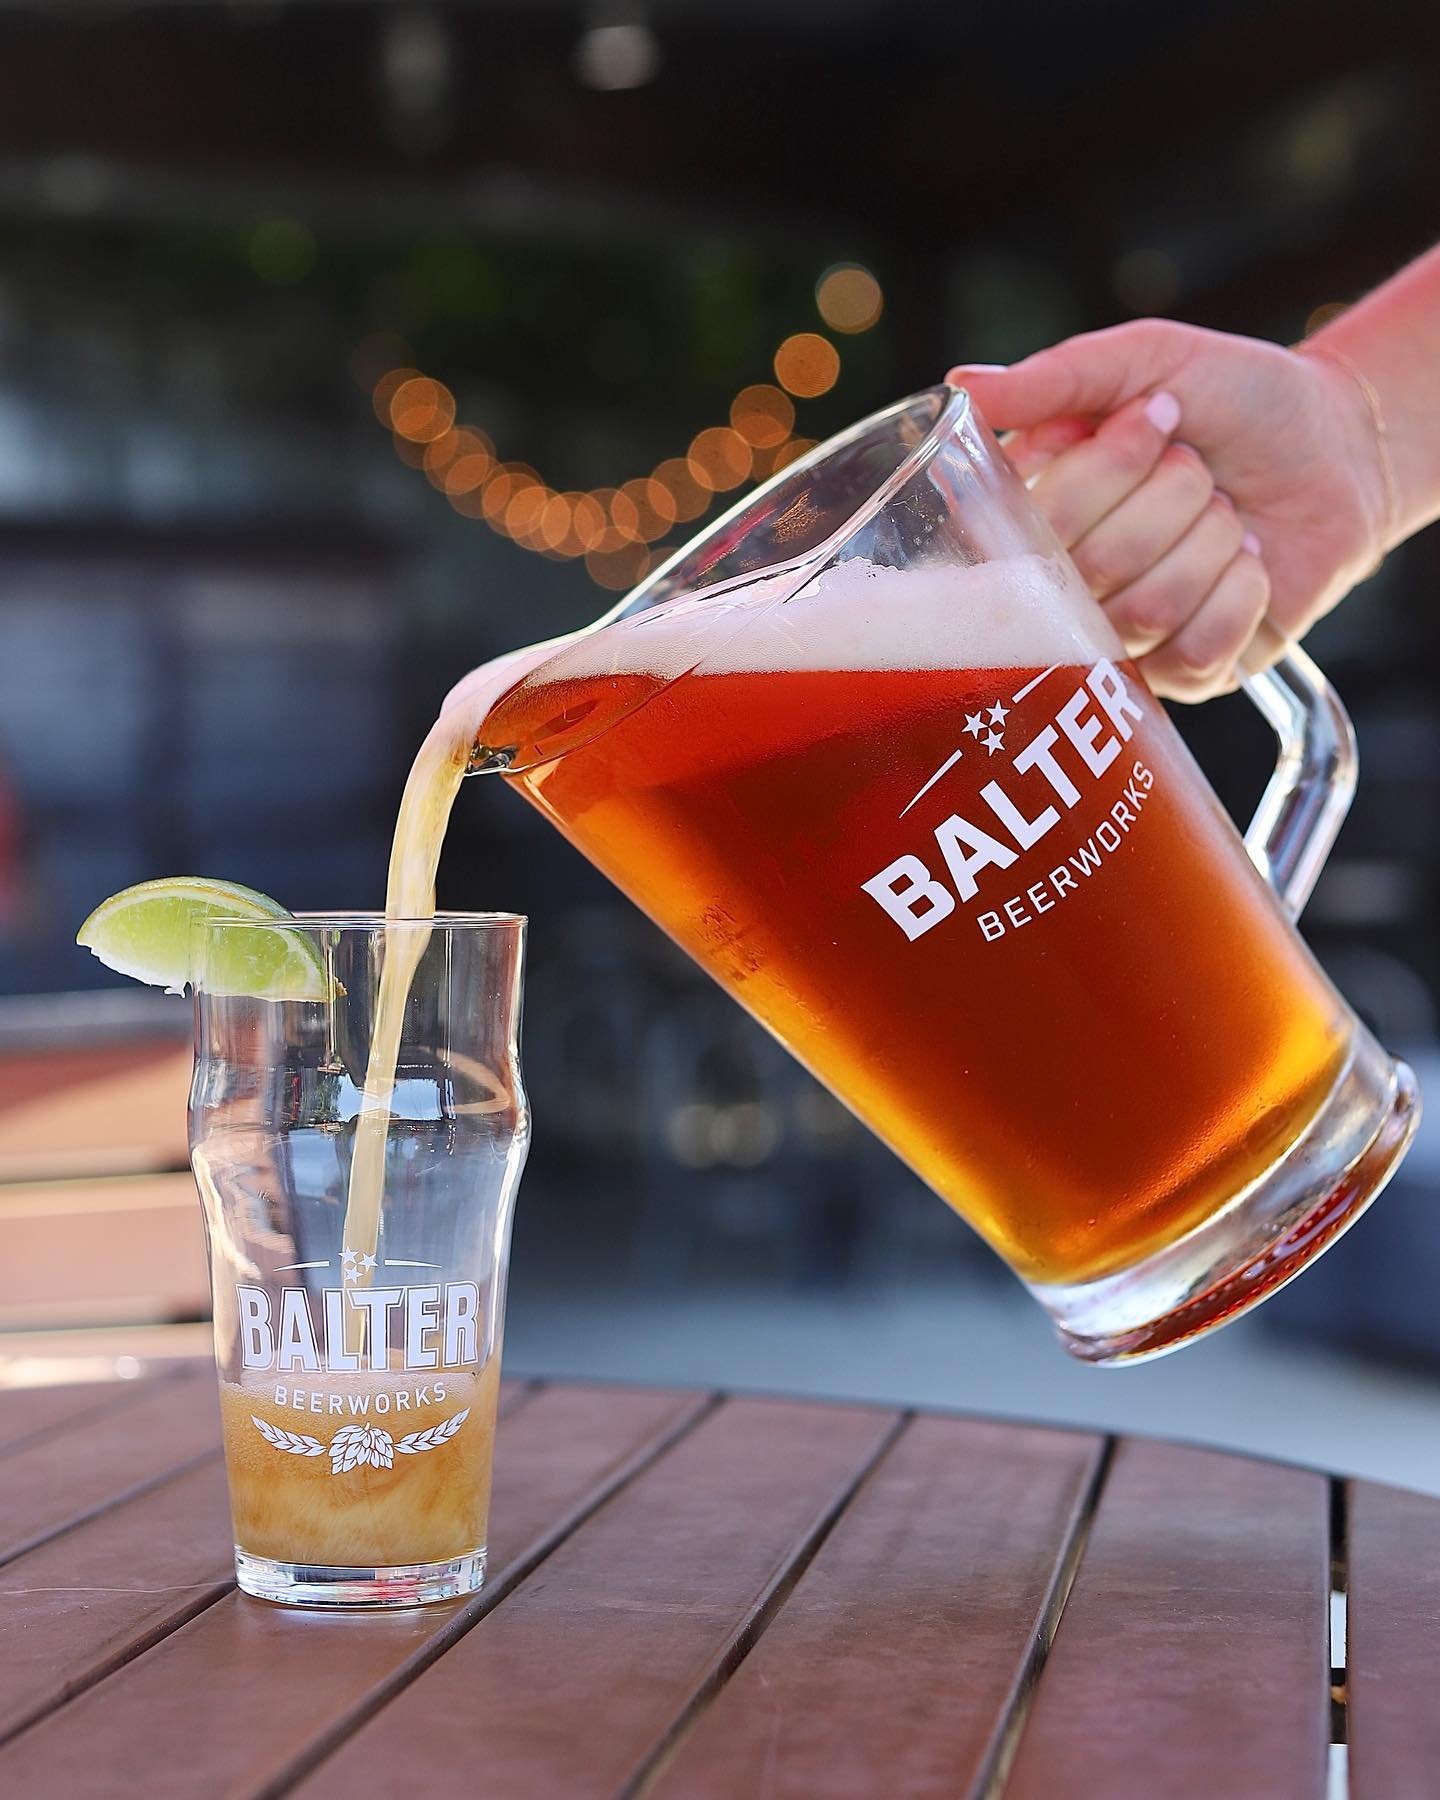 Did someone say Vecino Pitchers and Margs?🍻

Cinco De Balter specials start tomorrow and will last all weekend long! Enjoy specially priced cerveza, margs, and munchies. Estas listo para la fiesta&hellip; are you ready to party?👀